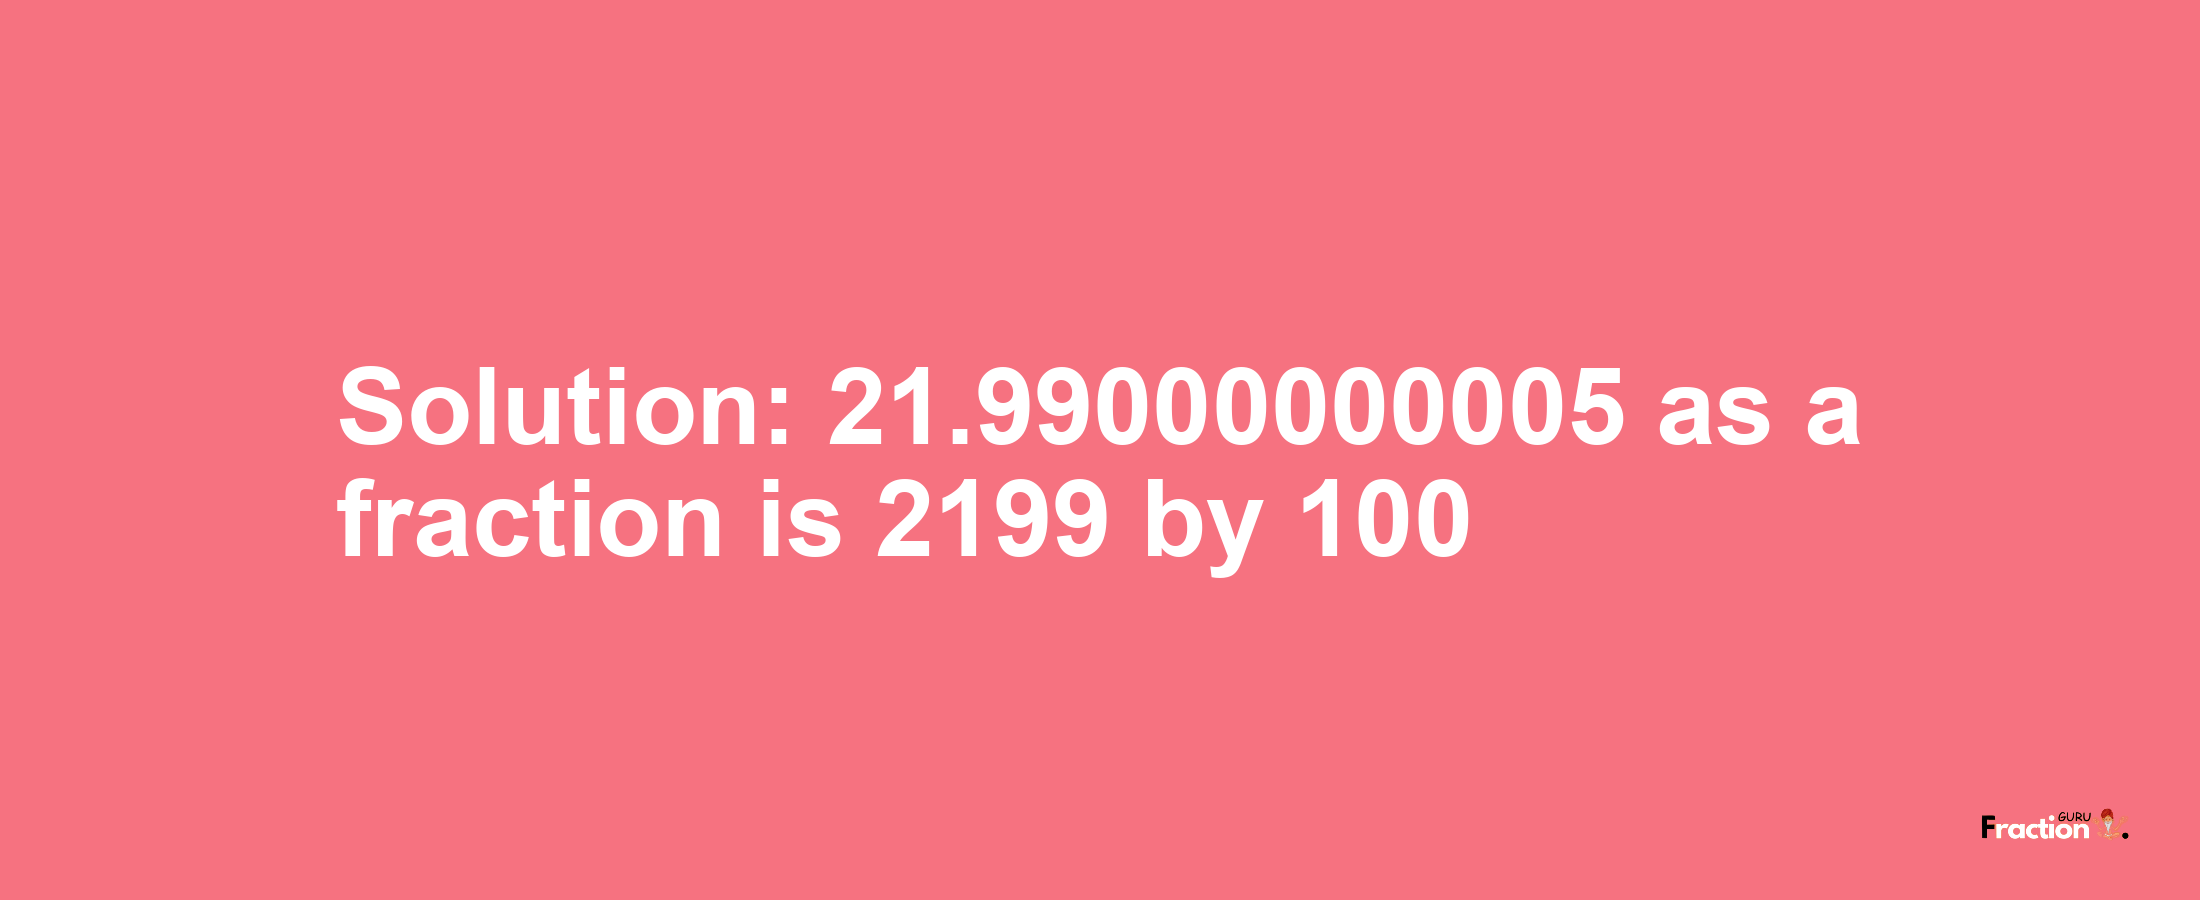 Solution:21.99000000005 as a fraction is 2199/100